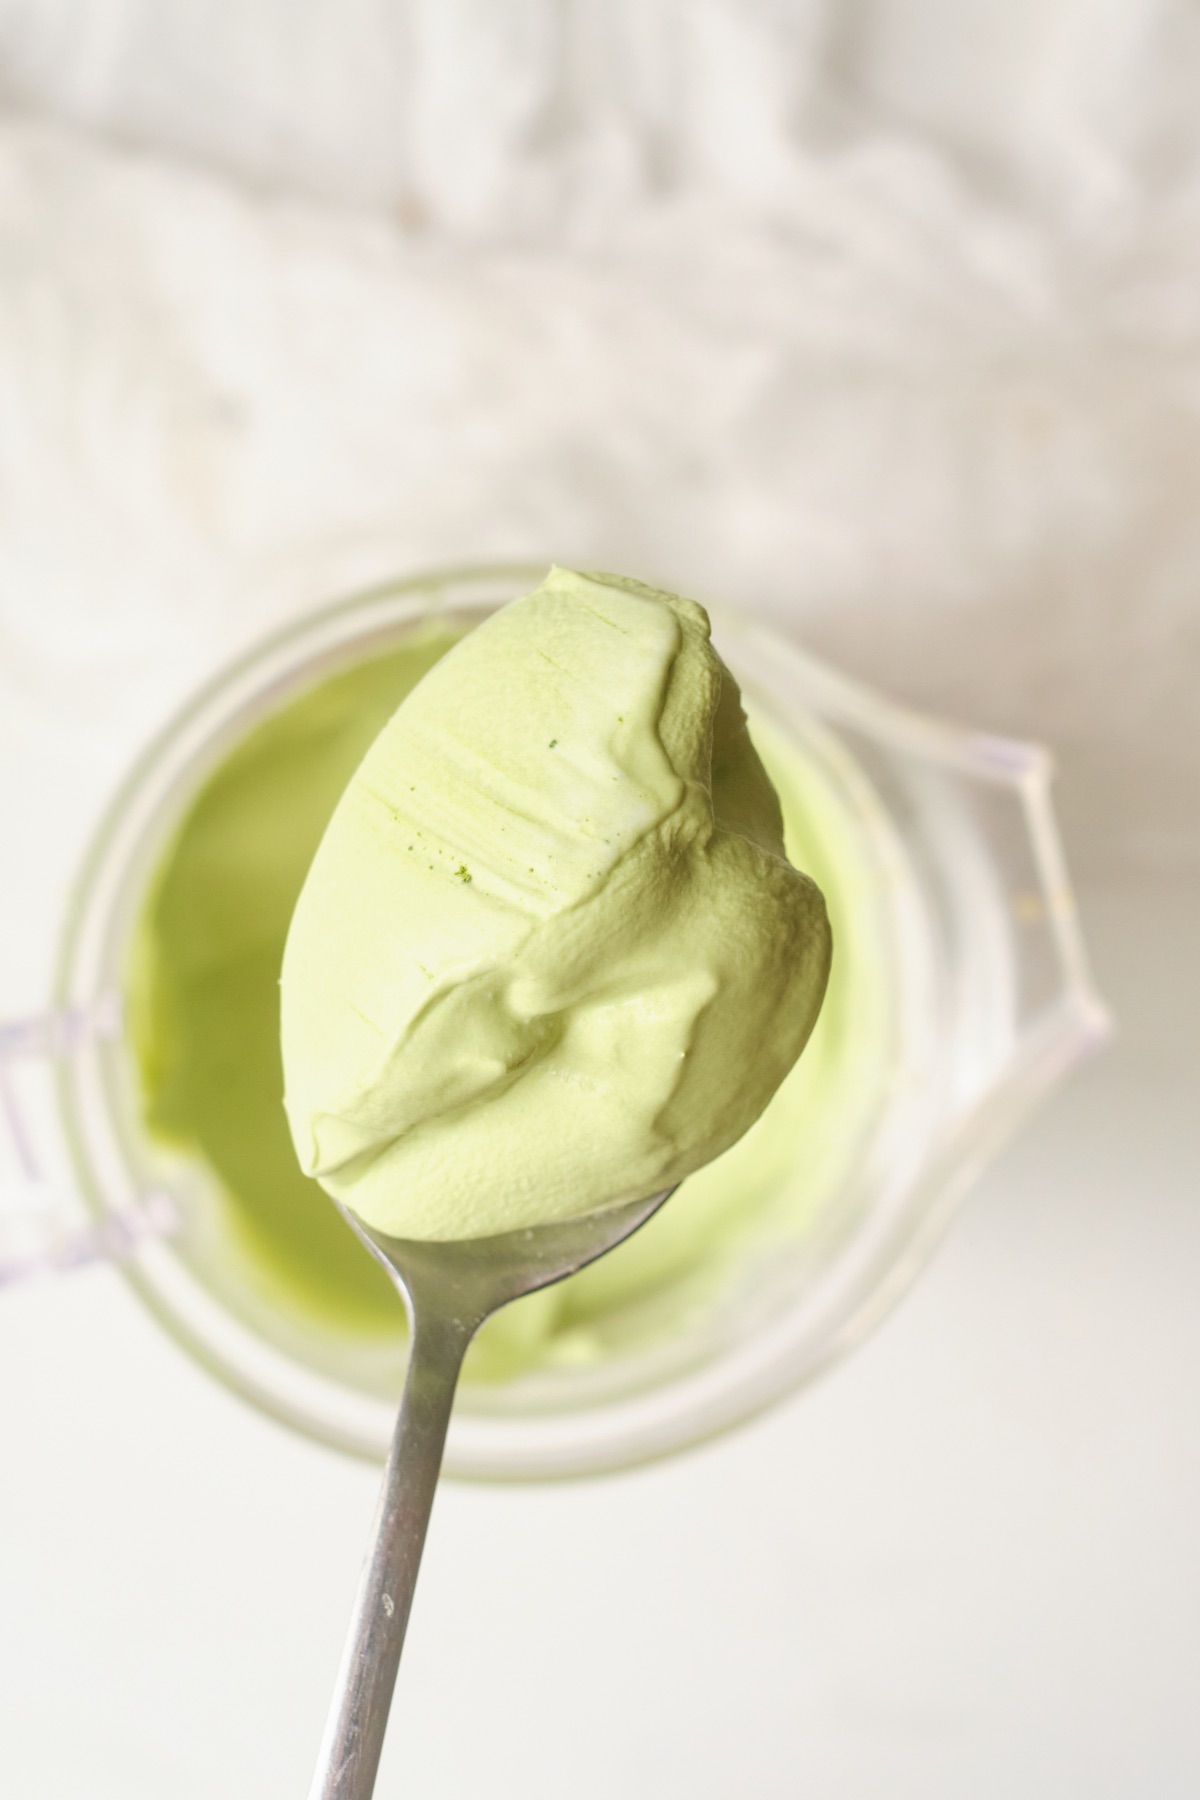  scoop the whipped matcha to place on a latte